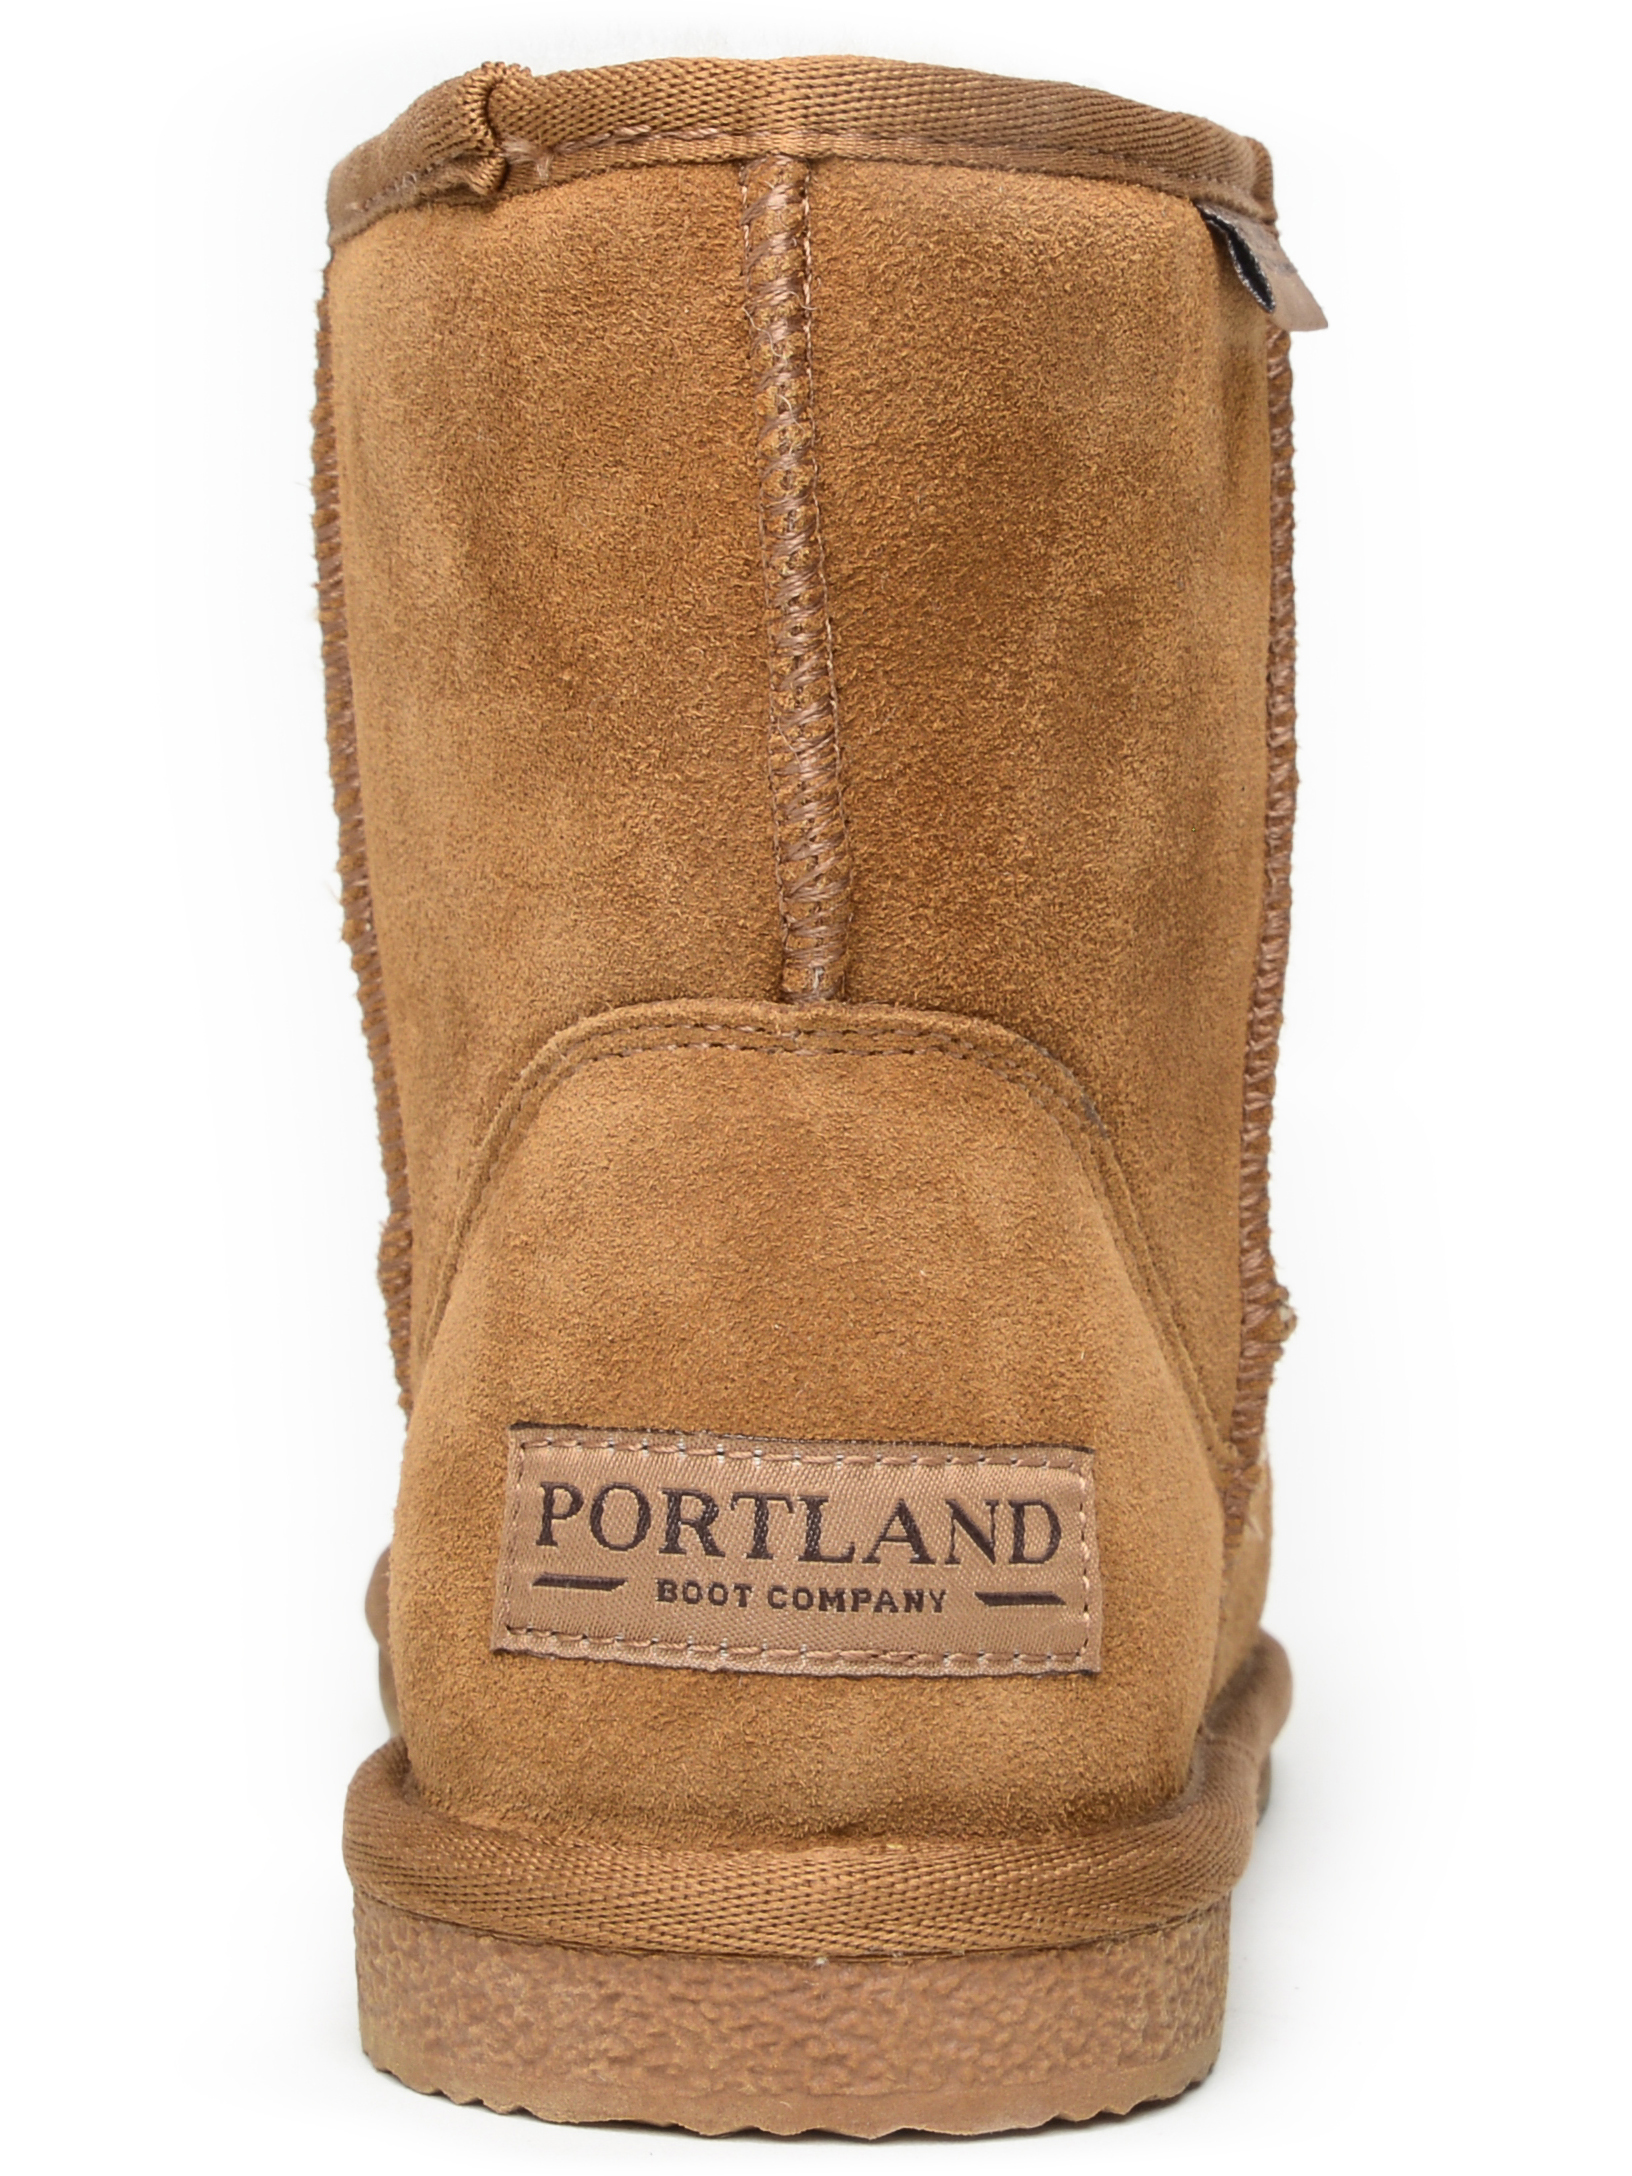 Portland Boot Company Women's Short Cozy Suede Boot - image 2 of 5